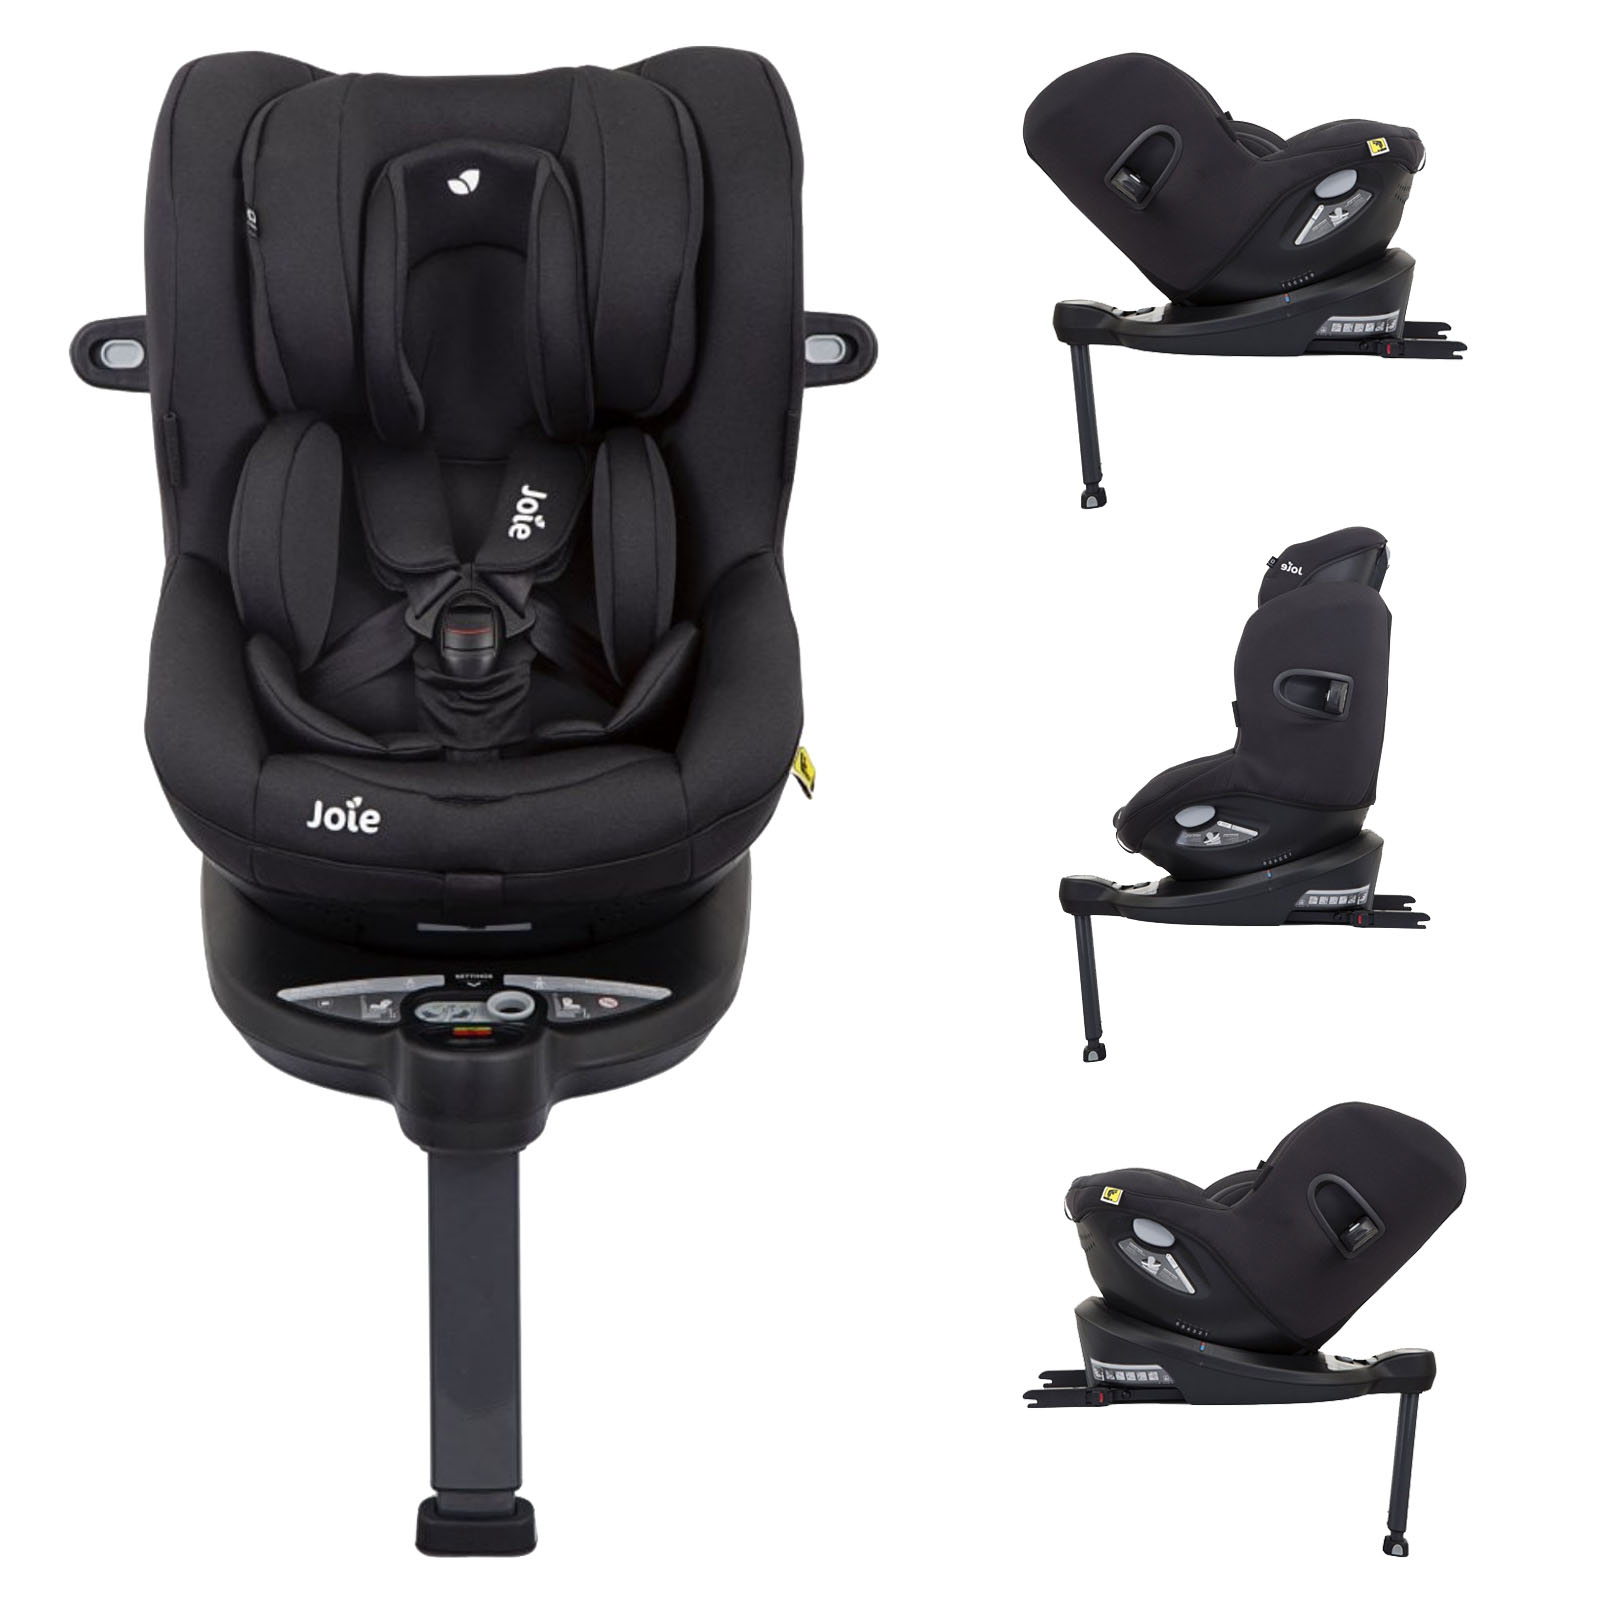 Joie i-Spin 360 i-Size ISOFIX Group 0+/1 Car Seat - Coal | Buy at ...